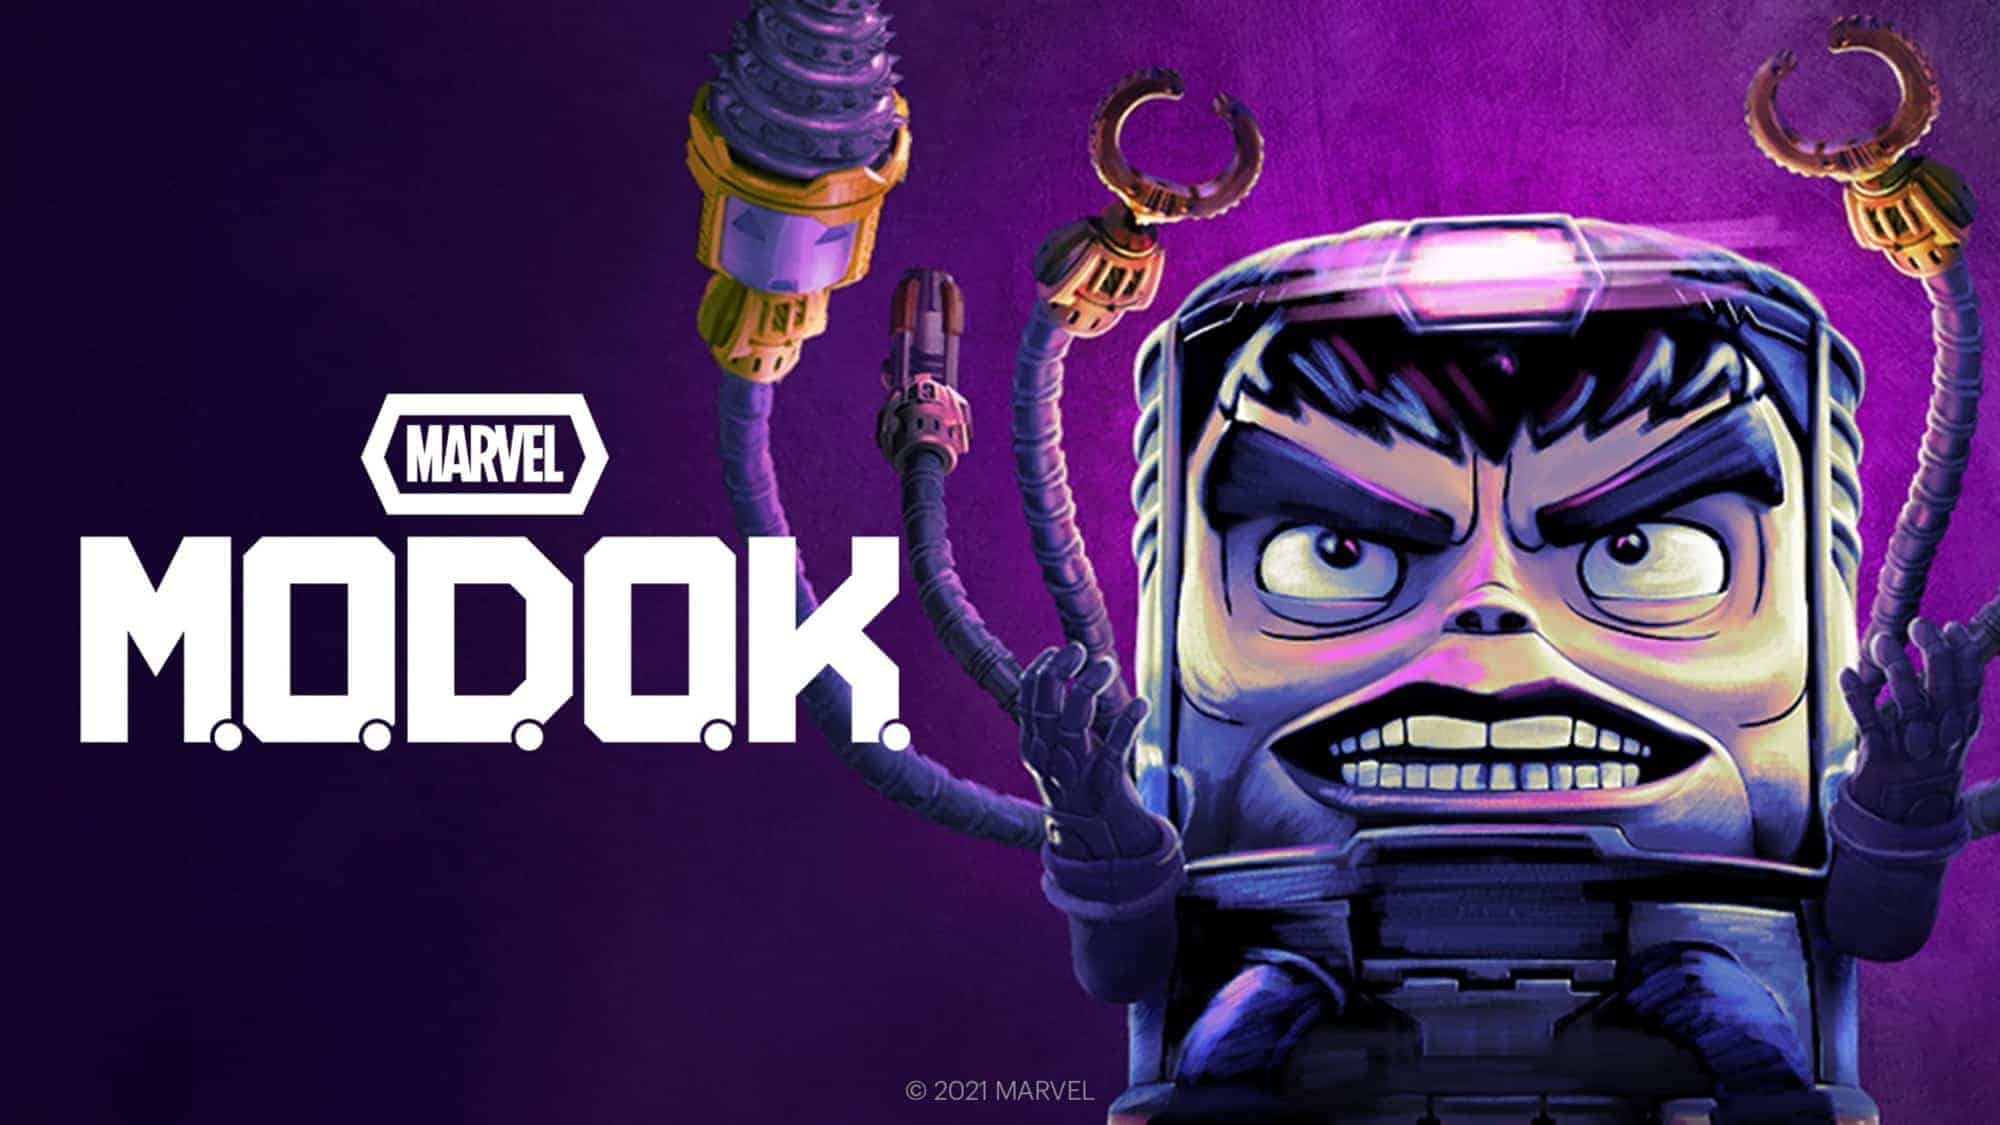 The Cast and Characters of Marvel’s “M.O.D.O.K.”